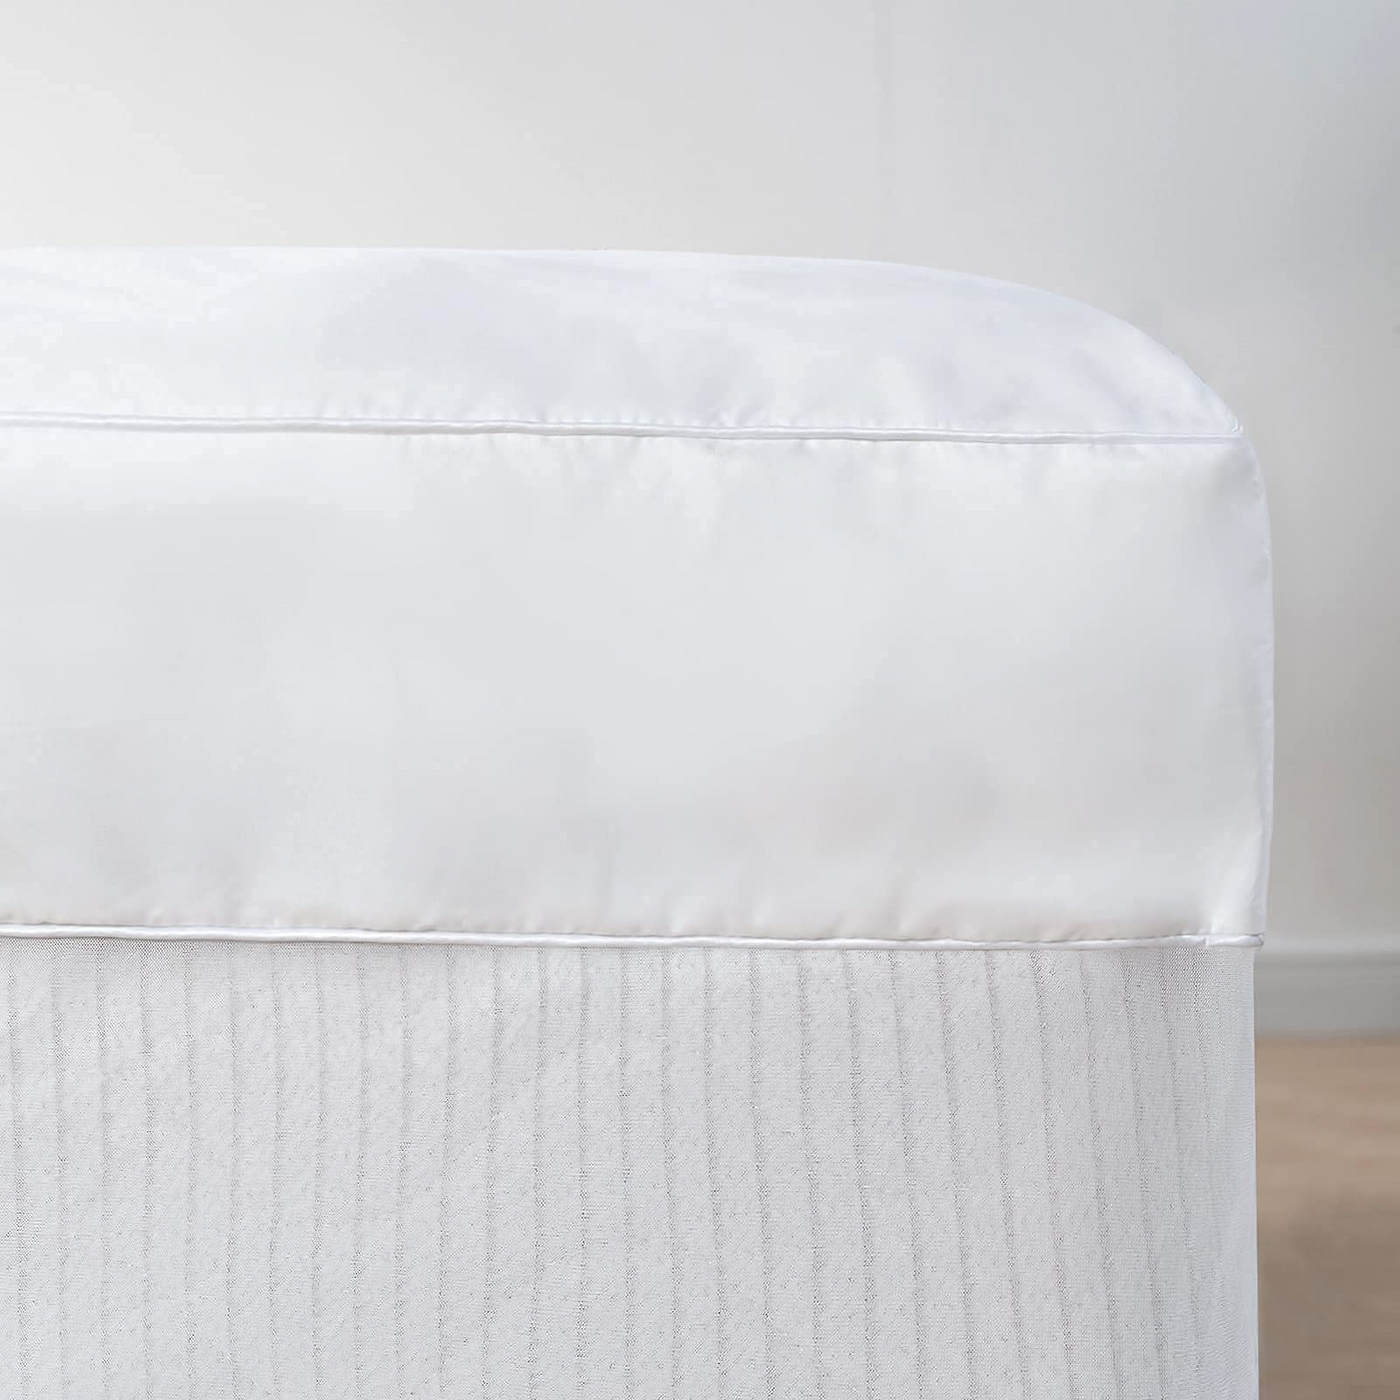 MAXYOYO Extra Thick Mattress Topper Full Size, 8-21” Deep Pocket, 5 Layer Structure